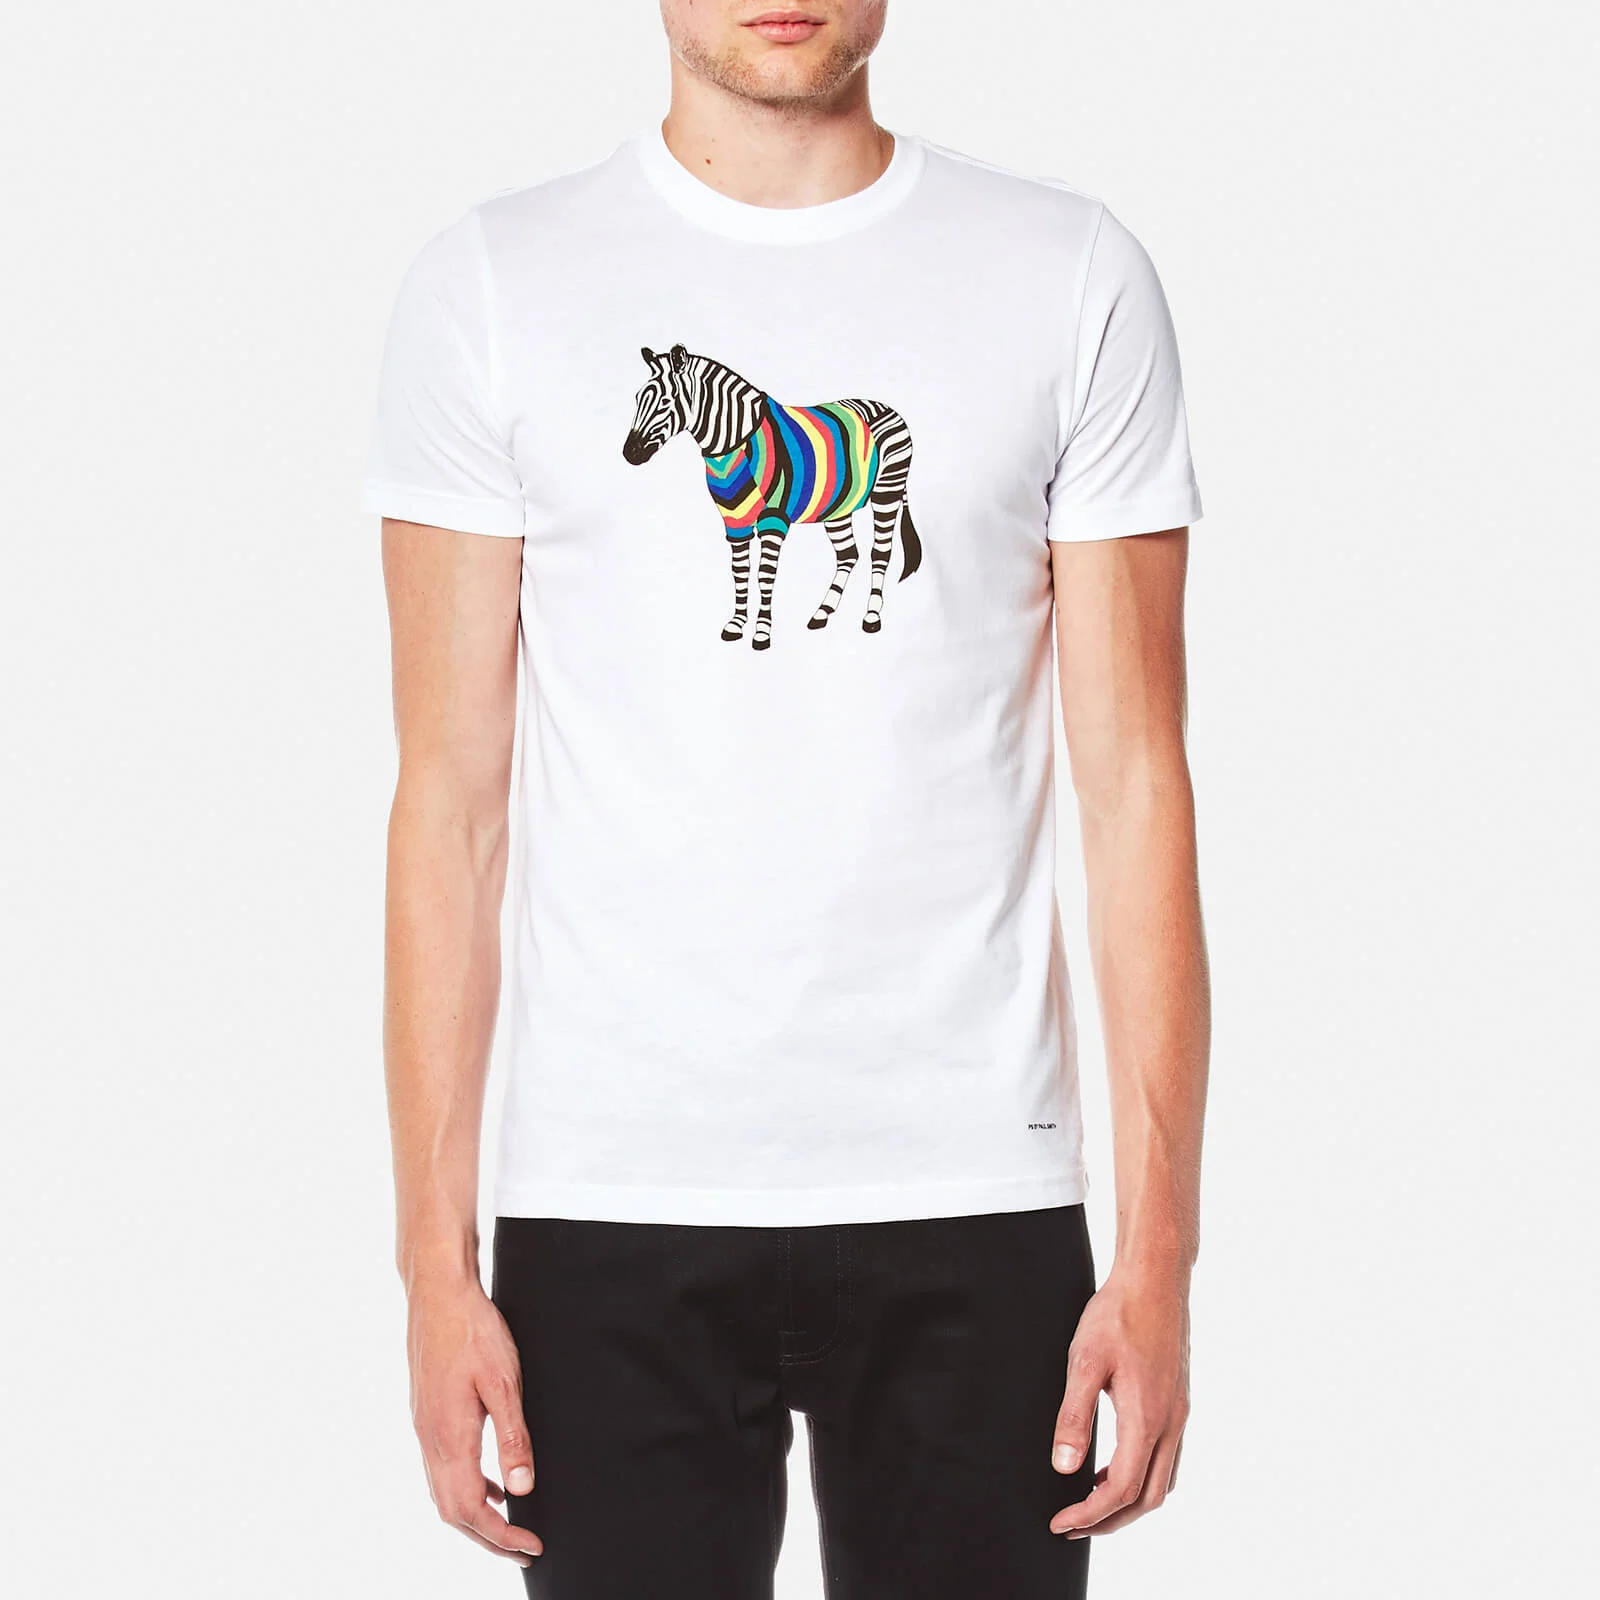 PS by Paul Smith Men's Printed Zebra with Jacket Slim Fit T-Shirt - White Image 1